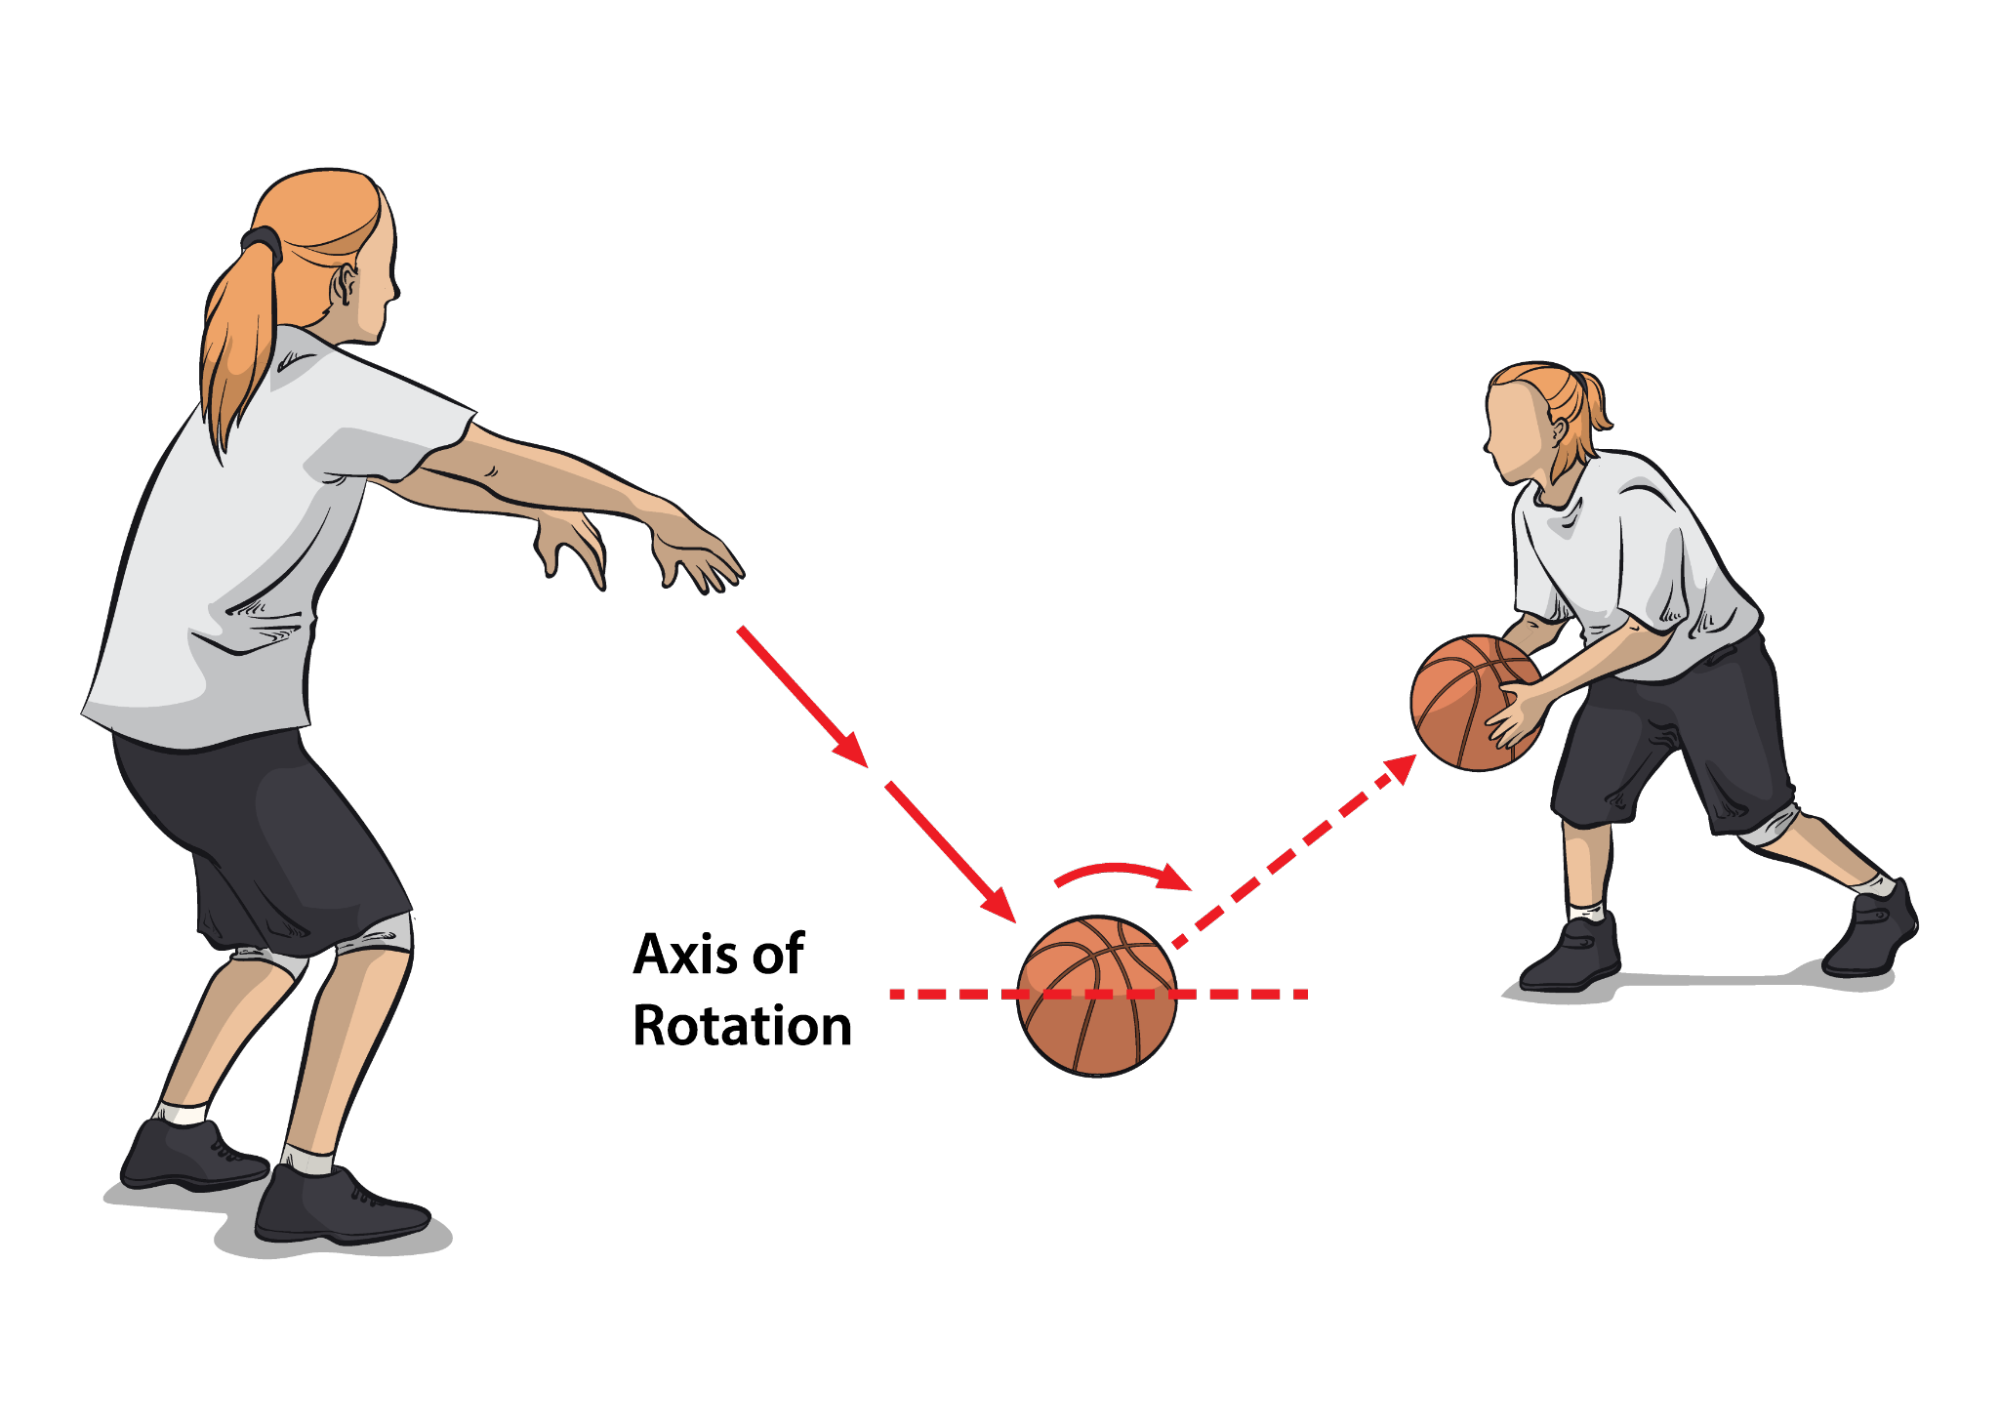 Basketball Coach Weekly - Dribbling Drills - Elbow Entry, Drive Through Lane